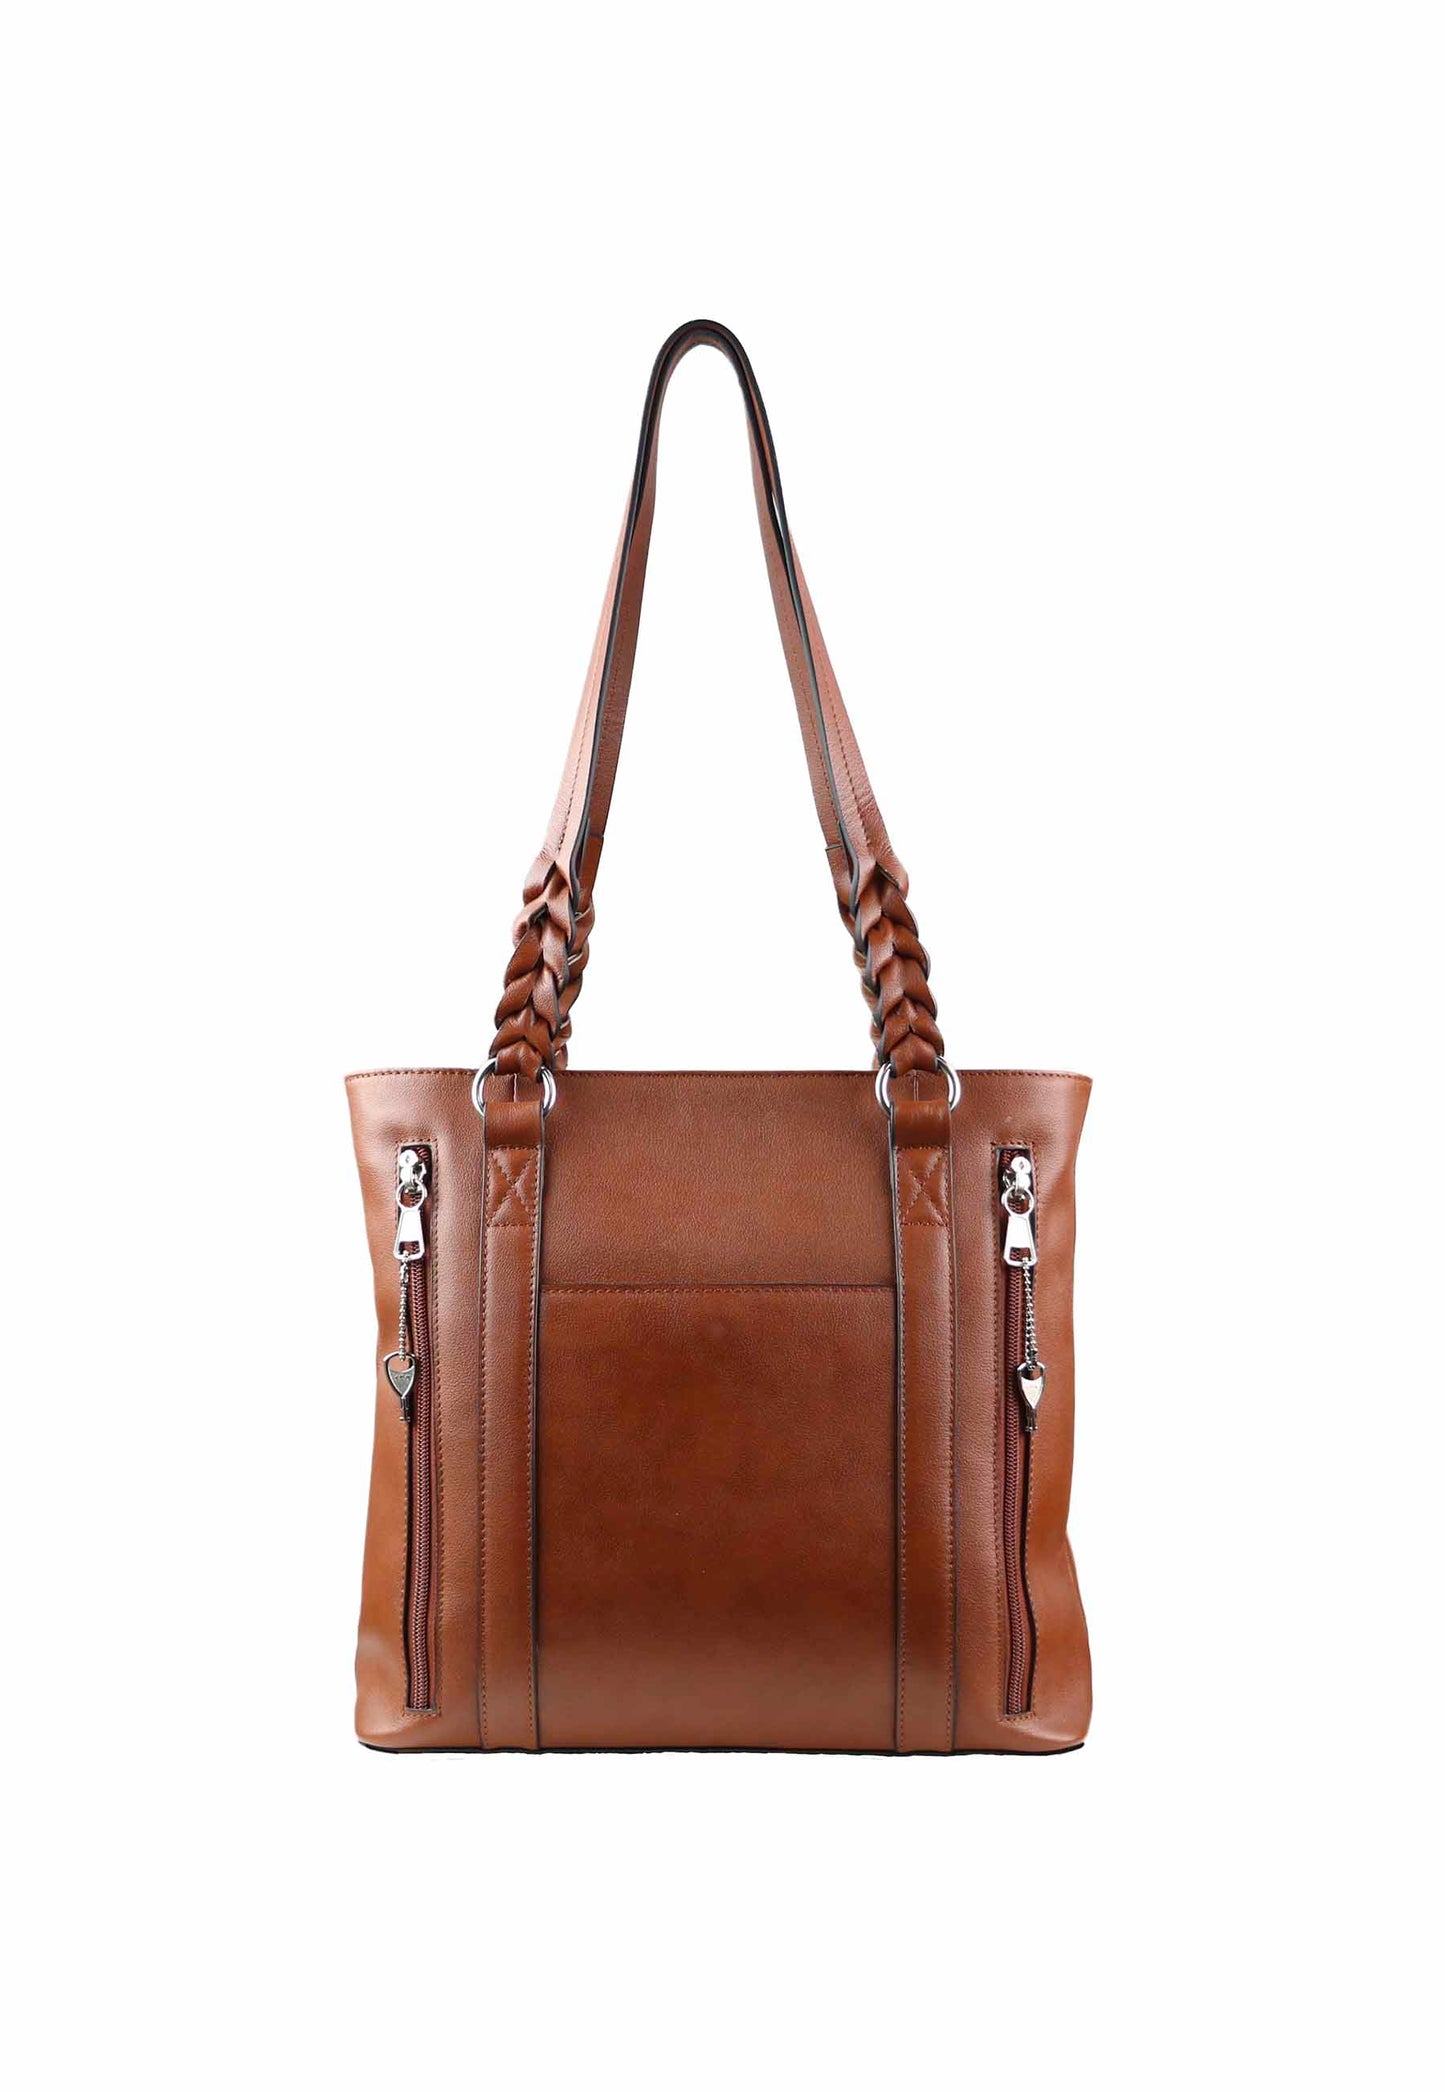 Mahogany leather conceal carry purse